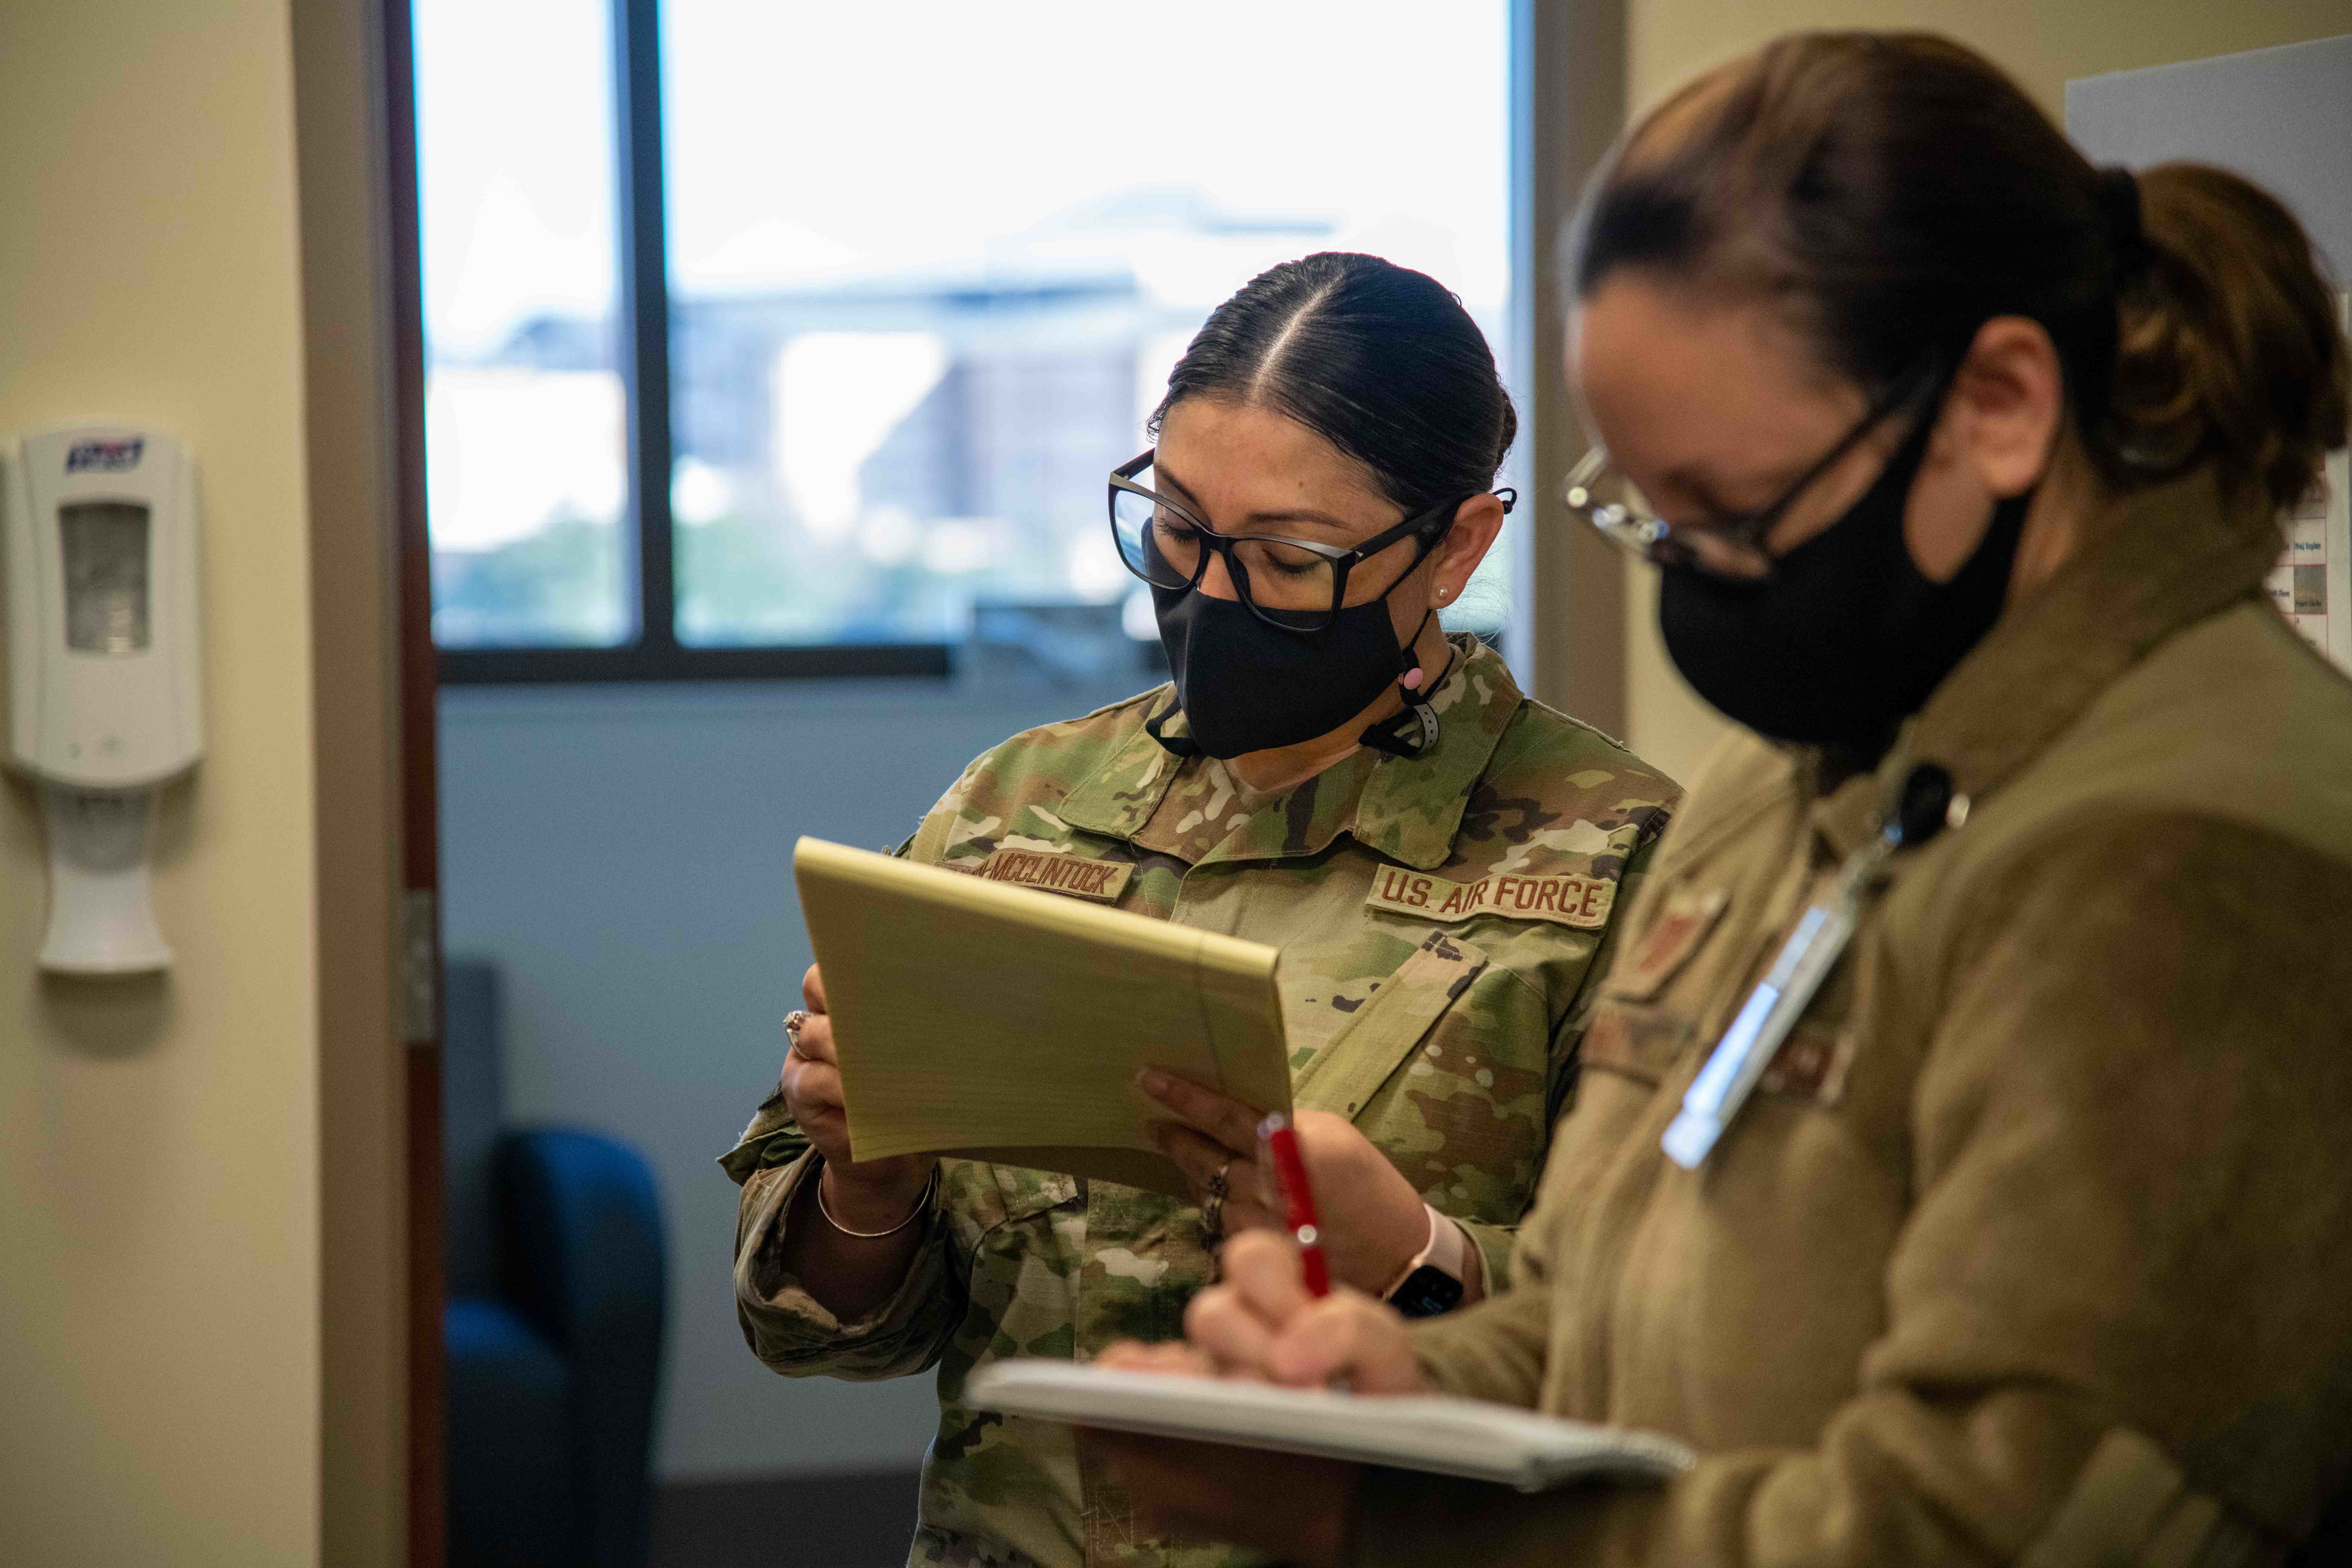 Members of the 559th Medical Squadron’s Mental Health Flight take notes during the MHS GENESIS “Go-Live” at Reid Health Services Center, Joint Base San Antonio-Lackland, Texas, Jan. 22, 2022. MHS GENESIS will become the standard electronic health record for Department of Defense and Veterans Affairs’ medical facilities. (U.S. Air Force photo by Tech. Sgt. Tory Patterson)